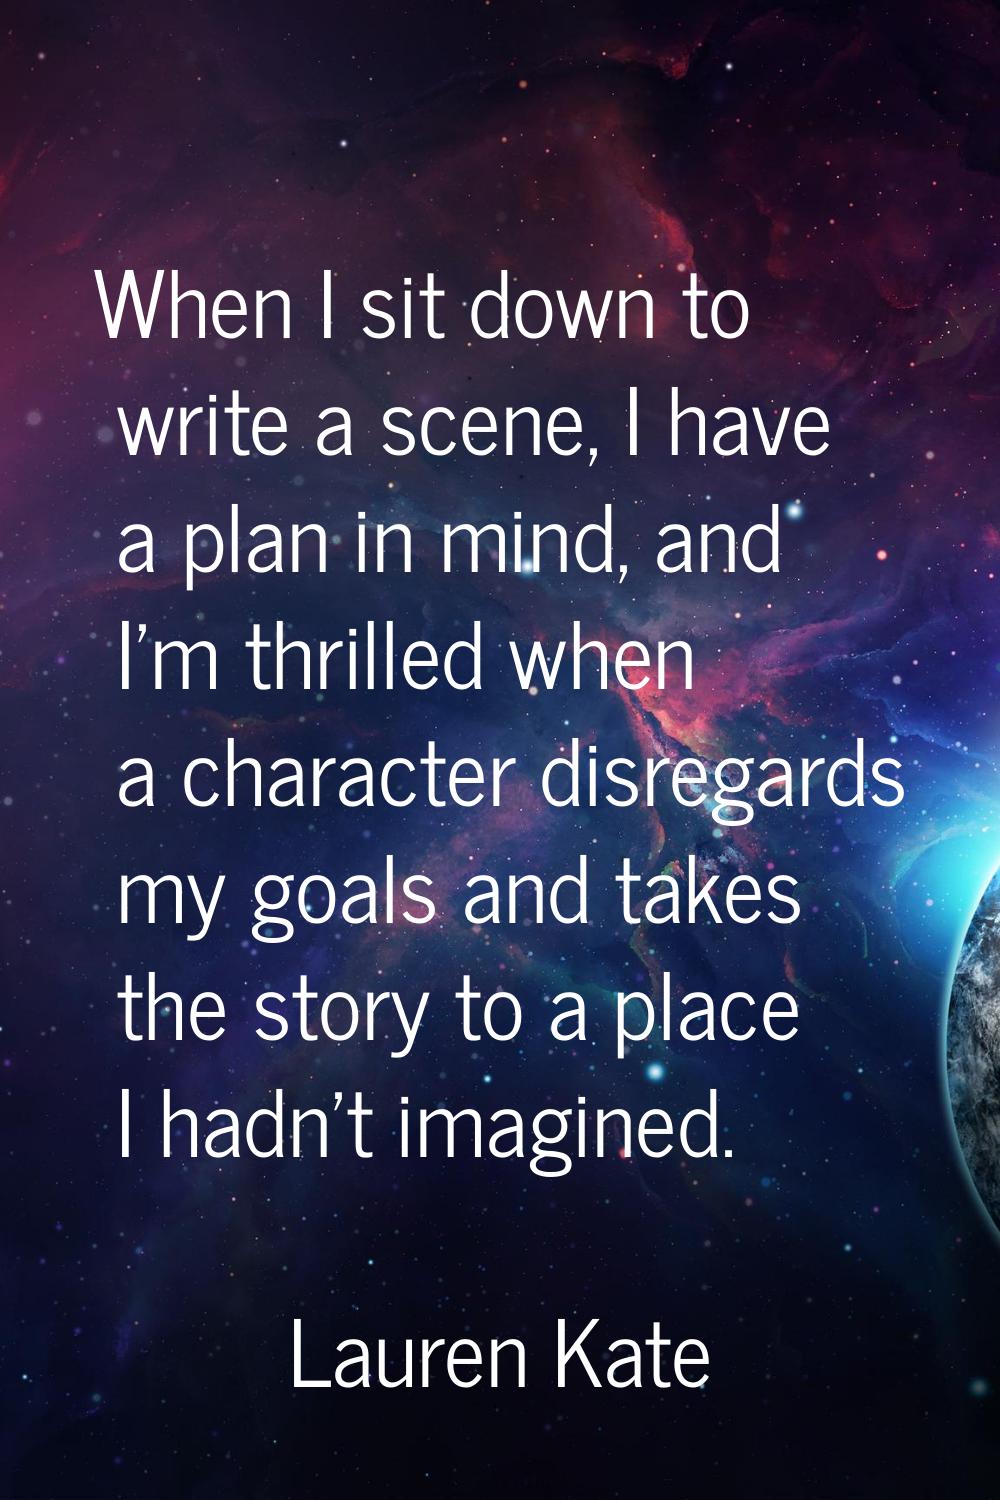 When I sit down to write a scene, I have a plan in mind, and I'm thrilled when a character disregar